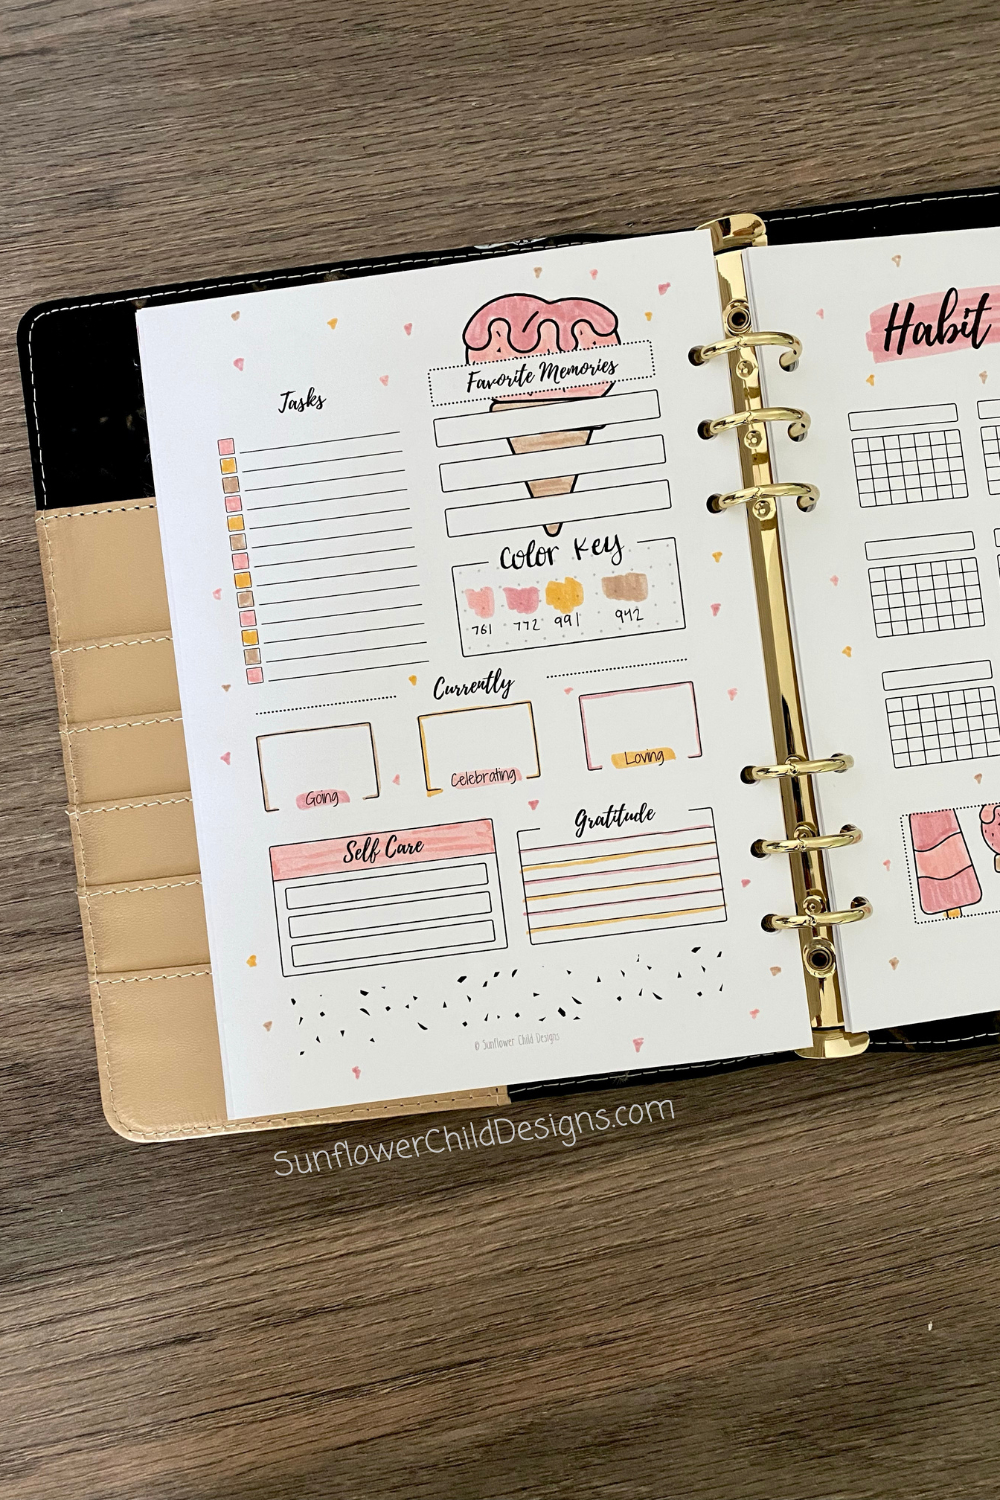 Free Bullet Journal Printables 25+ Pages With Doodles — Sunflower - Free Printable A5 Journal Pages